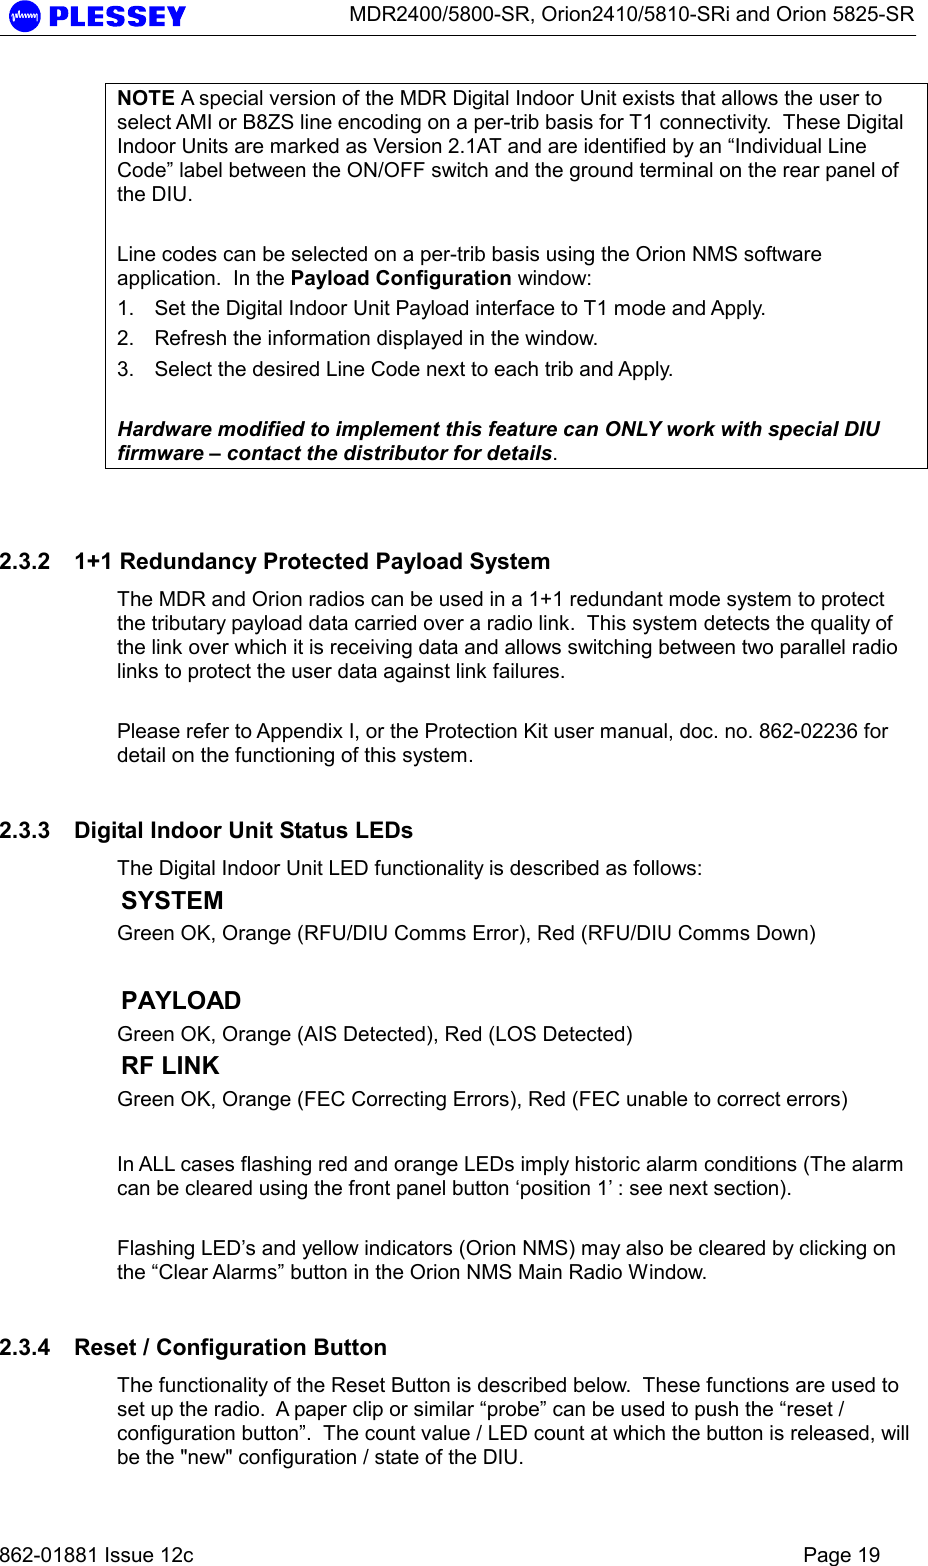      MDR2400/5800-SR, Orion2410/5810-SRi and Orion 5825-SR   862-01881 Issue 12c    Page 19 NOTE A special version of the MDR Digital Indoor Unit exists that allows the user to select AMI or B8ZS line encoding on a per-trib basis for T1 connectivity.  These Digital Indoor Units are marked as Version 2.1AT and are identified by an “Individual Line Code” label between the ON/OFF switch and the ground terminal on the rear panel of the DIU.  Line codes can be selected on a per-trib basis using the Orion NMS software application.  In the Payload Configuration window: 1.  Set the Digital Indoor Unit Payload interface to T1 mode and Apply. 2.  Refresh the information displayed in the window. 3.  Select the desired Line Code next to each trib and Apply.  Hardware modified to implement this feature can ONLY work with special DIU firmware – contact the distributor for details.  2.3.2  1+1 Redundancy Protected Payload System The MDR and Orion radios can be used in a 1+1 redundant mode system to protect the tributary payload data carried over a radio link.  This system detects the quality of the link over which it is receiving data and allows switching between two parallel radio links to protect the user data against link failures.  Please refer to Appendix I, or the Protection Kit user manual, doc. no. 862-02236 for detail on the functioning of this system. 2.3.3  Digital Indoor Unit Status LEDs The Digital Indoor Unit LED functionality is described as follows: SYSTEM   Green OK, Orange (RFU/DIU Comms Error), Red (RFU/DIU Comms Down)    PAYLOAD Green OK, Orange (AIS Detected), Red (LOS Detected) RF LINK  Green OK, Orange (FEC Correcting Errors), Red (FEC unable to correct errors)  In ALL cases flashing red and orange LEDs imply historic alarm conditions (The alarm can be cleared using the front panel button ‘position 1’ : see next section).  Flashing LED’s and yellow indicators (Orion NMS) may also be cleared by clicking on the “Clear Alarms” button in the Orion NMS Main Radio Window. 2.3.4  Reset / Configuration Button The functionality of the Reset Button is described below.  These functions are used to set up the radio.  A paper clip or similar “probe” can be used to push the “reset / configuration button”.  The count value / LED count at which the button is released, will be the &quot;new&quot; configuration / state of the DIU. 